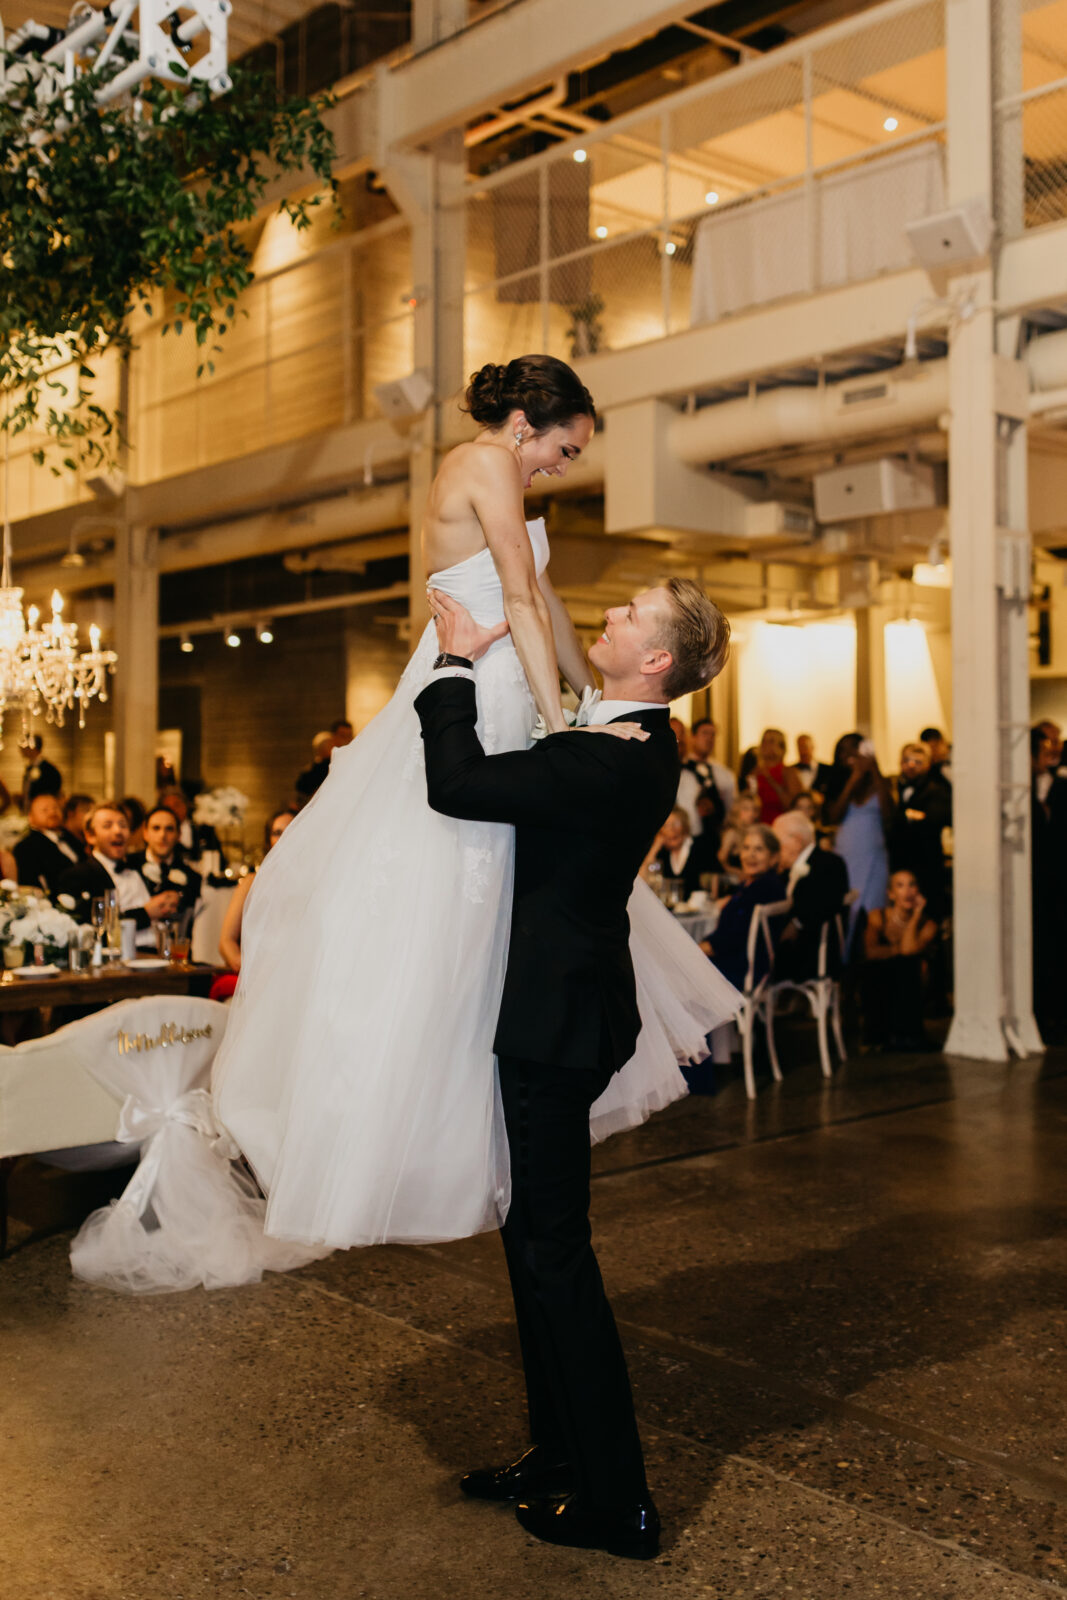 A photo of the newlyweds' first dance as a married couple.